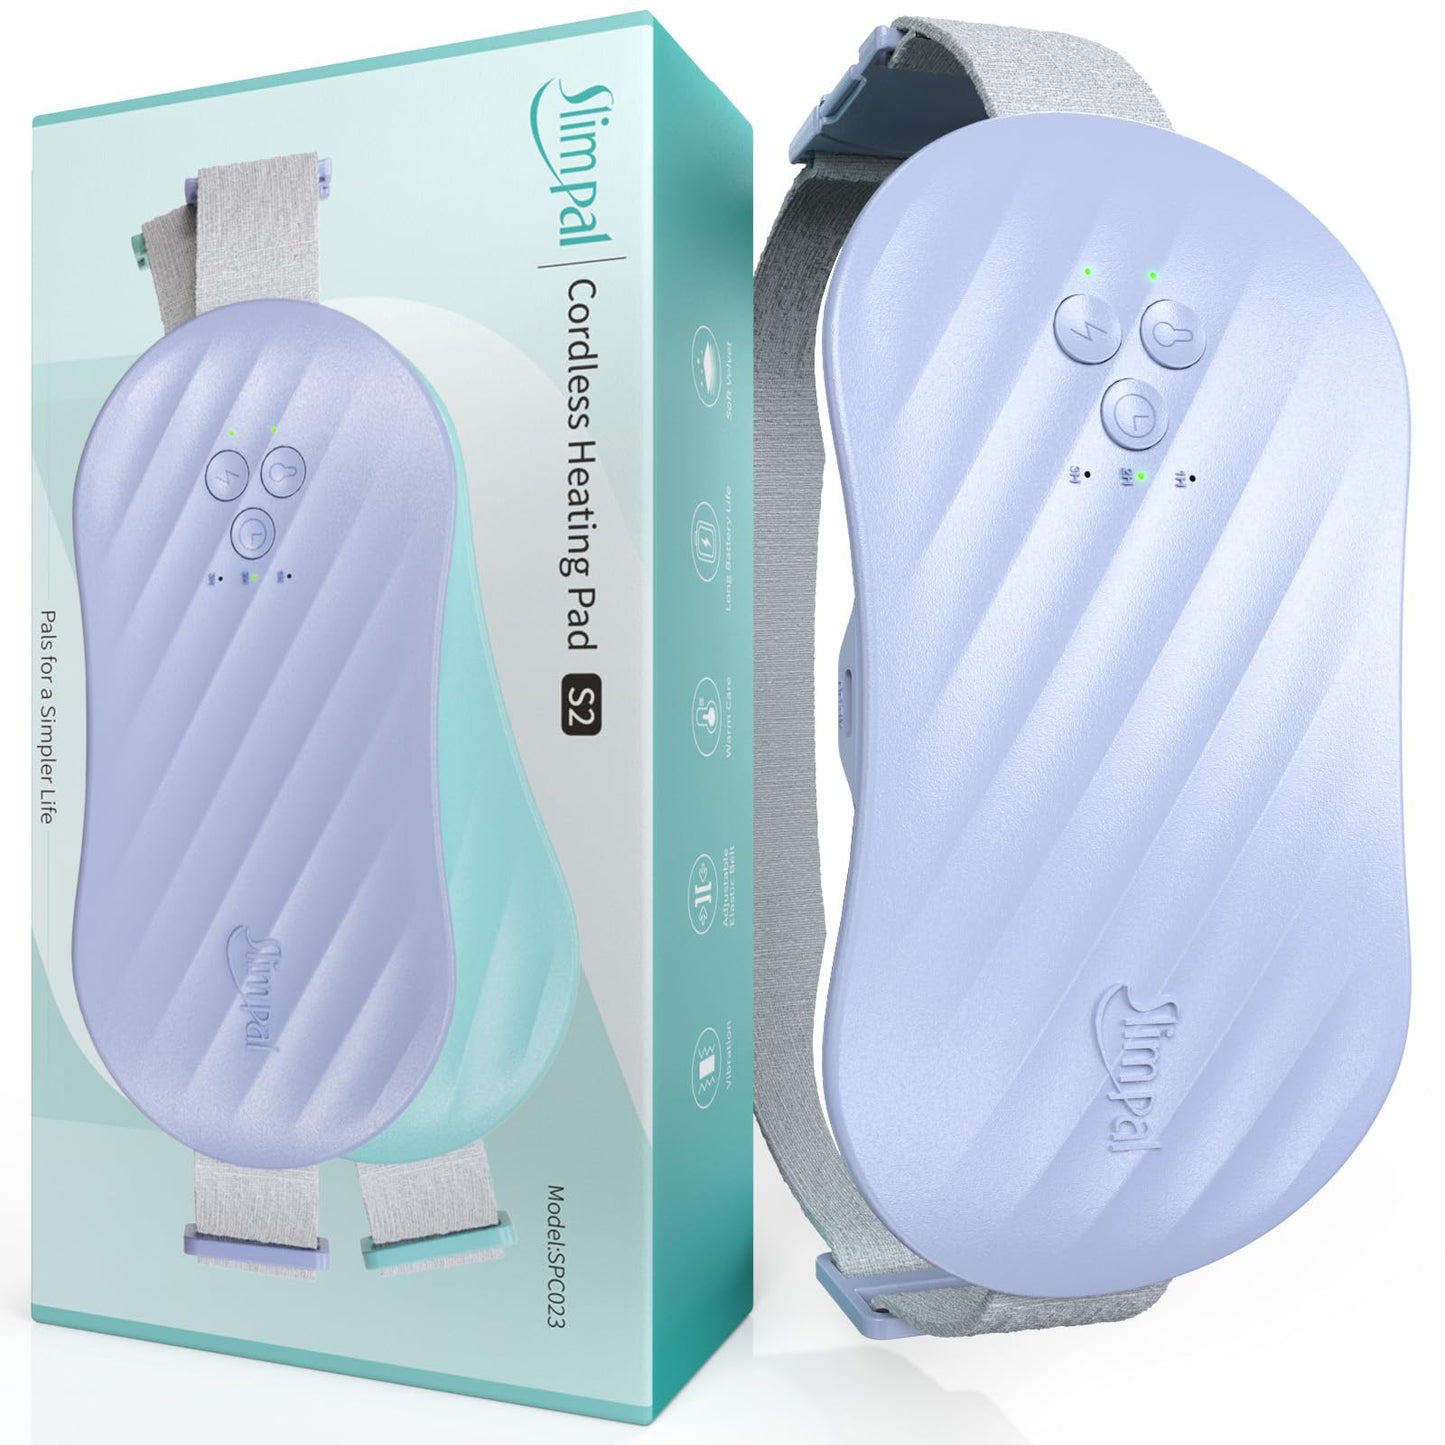 Slimpal Heating Pad for Period Cramps, Portable Menstrual Pain Relief Electric Cordless Heating Belt w/ 4 Heat Levels, SPC023-S2